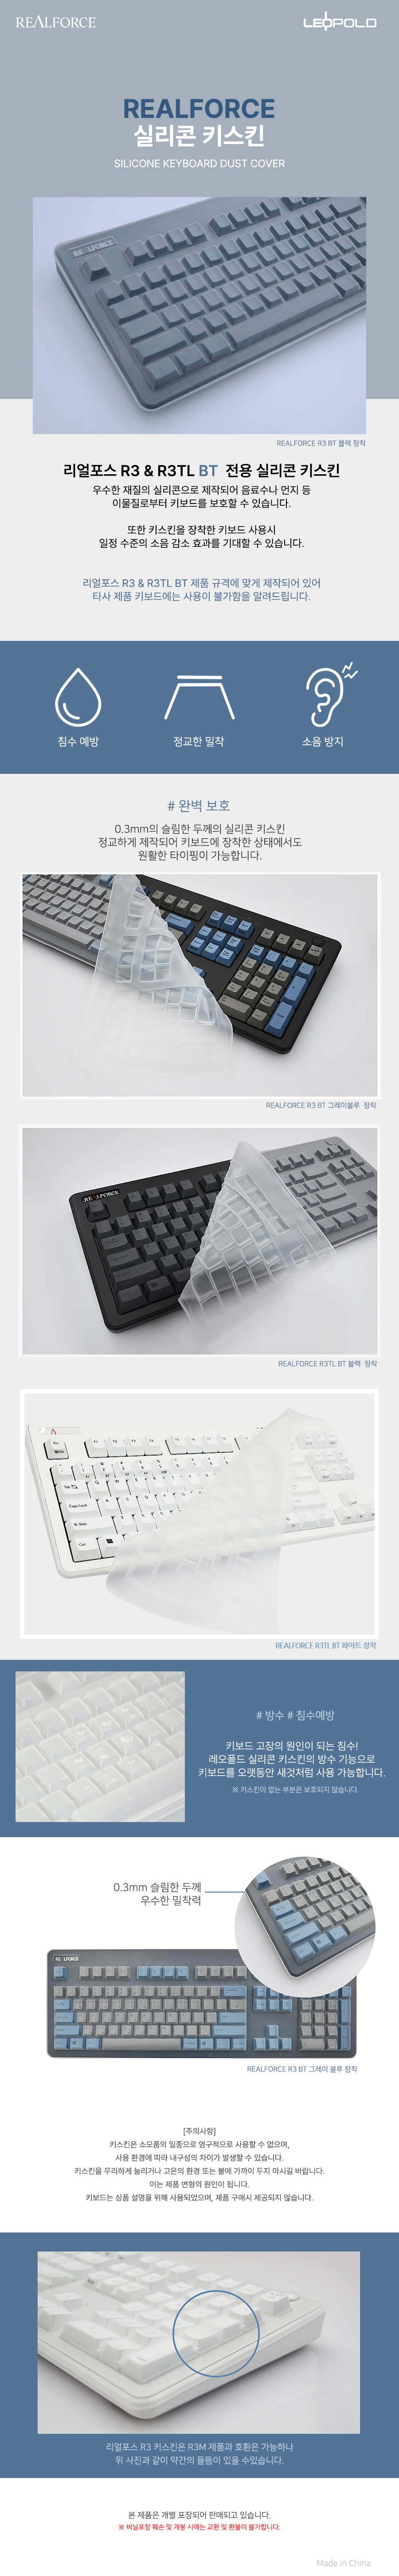 realforce_silicon_complet.jpg